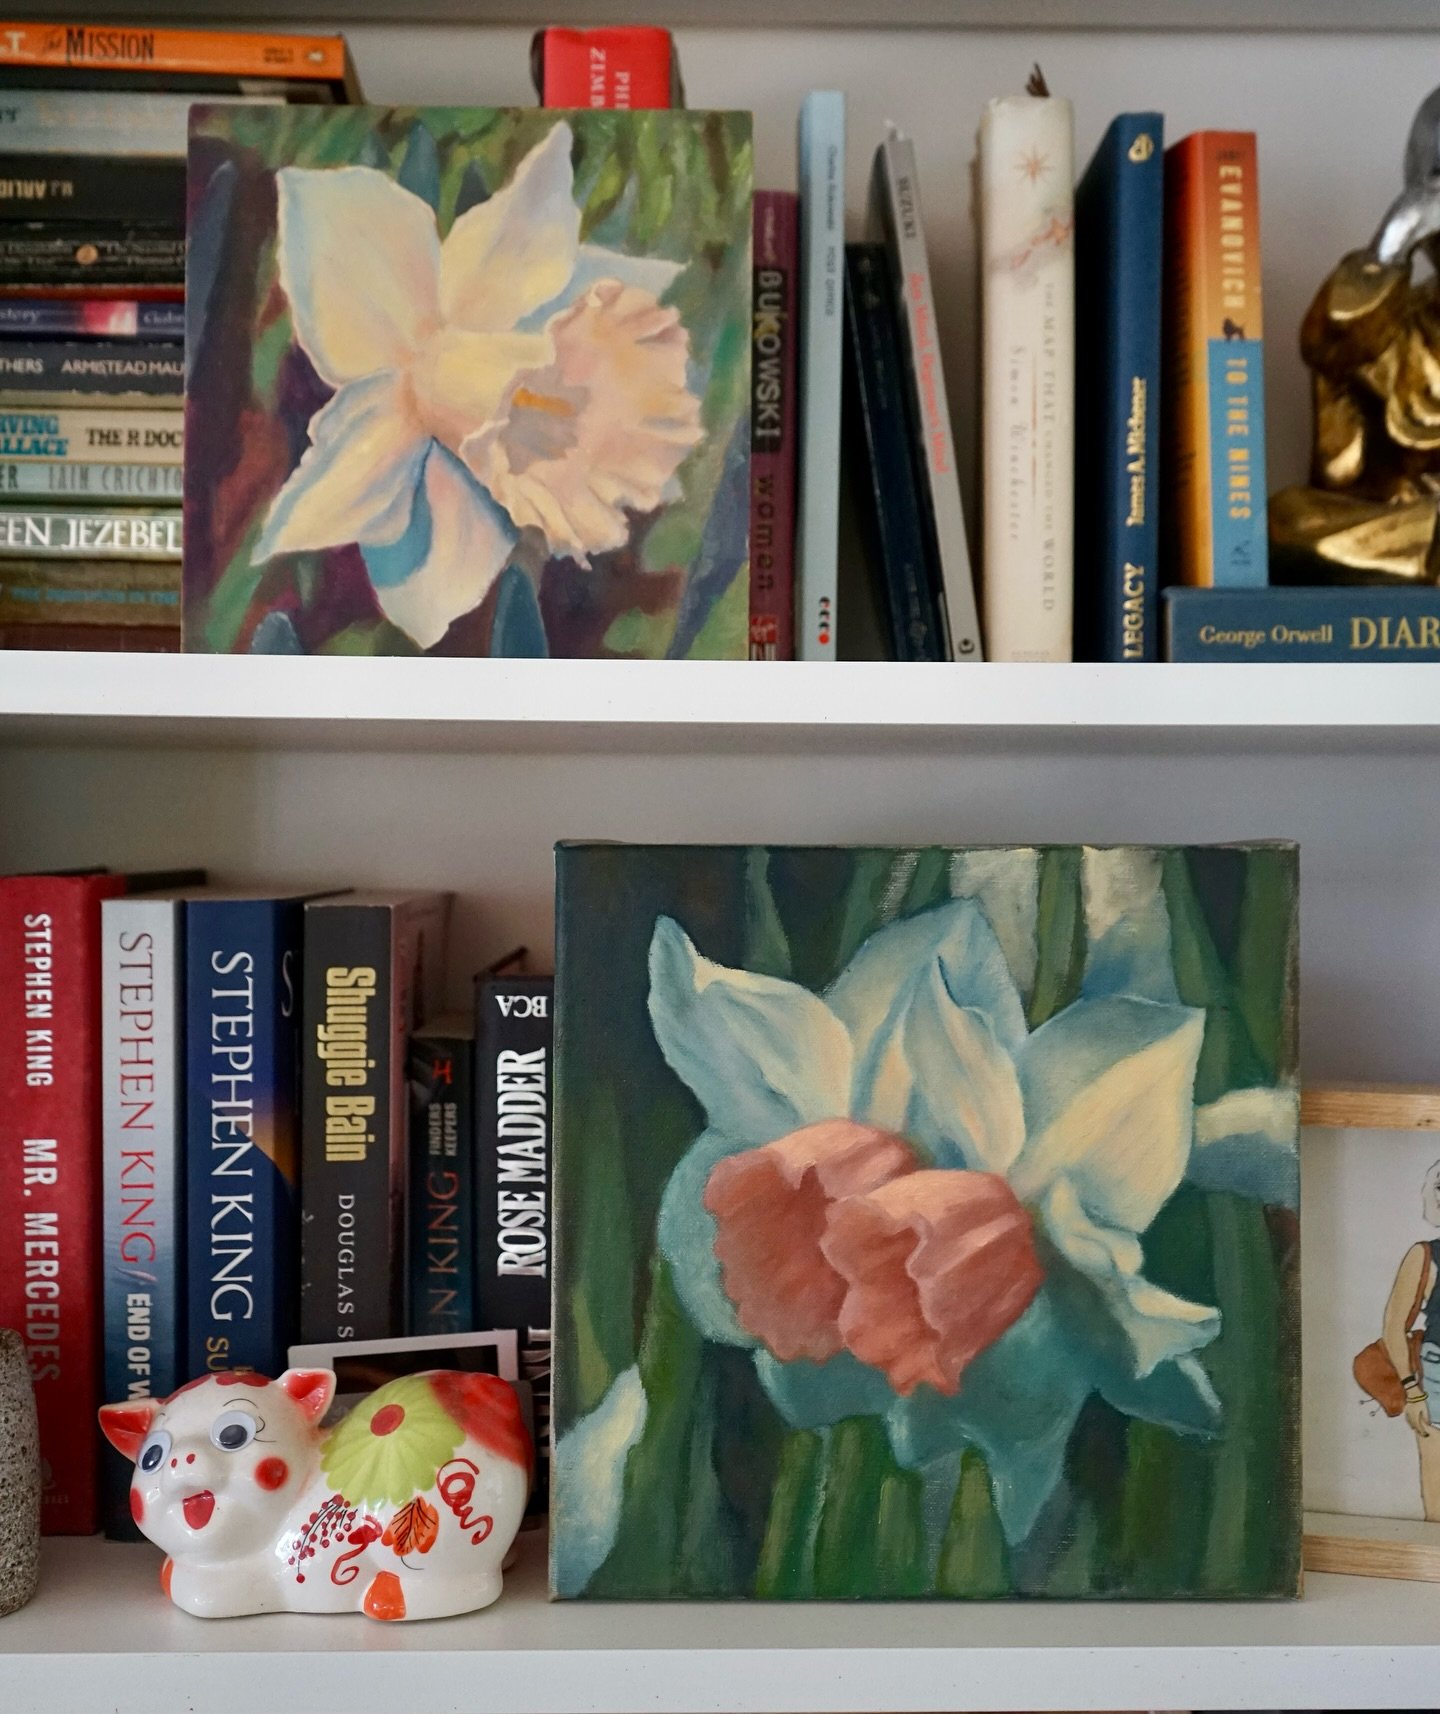 Something about wild daffodils

Available to purchase at the upcoming @affordableartfairau in Brisbane this May with @mintarthouse